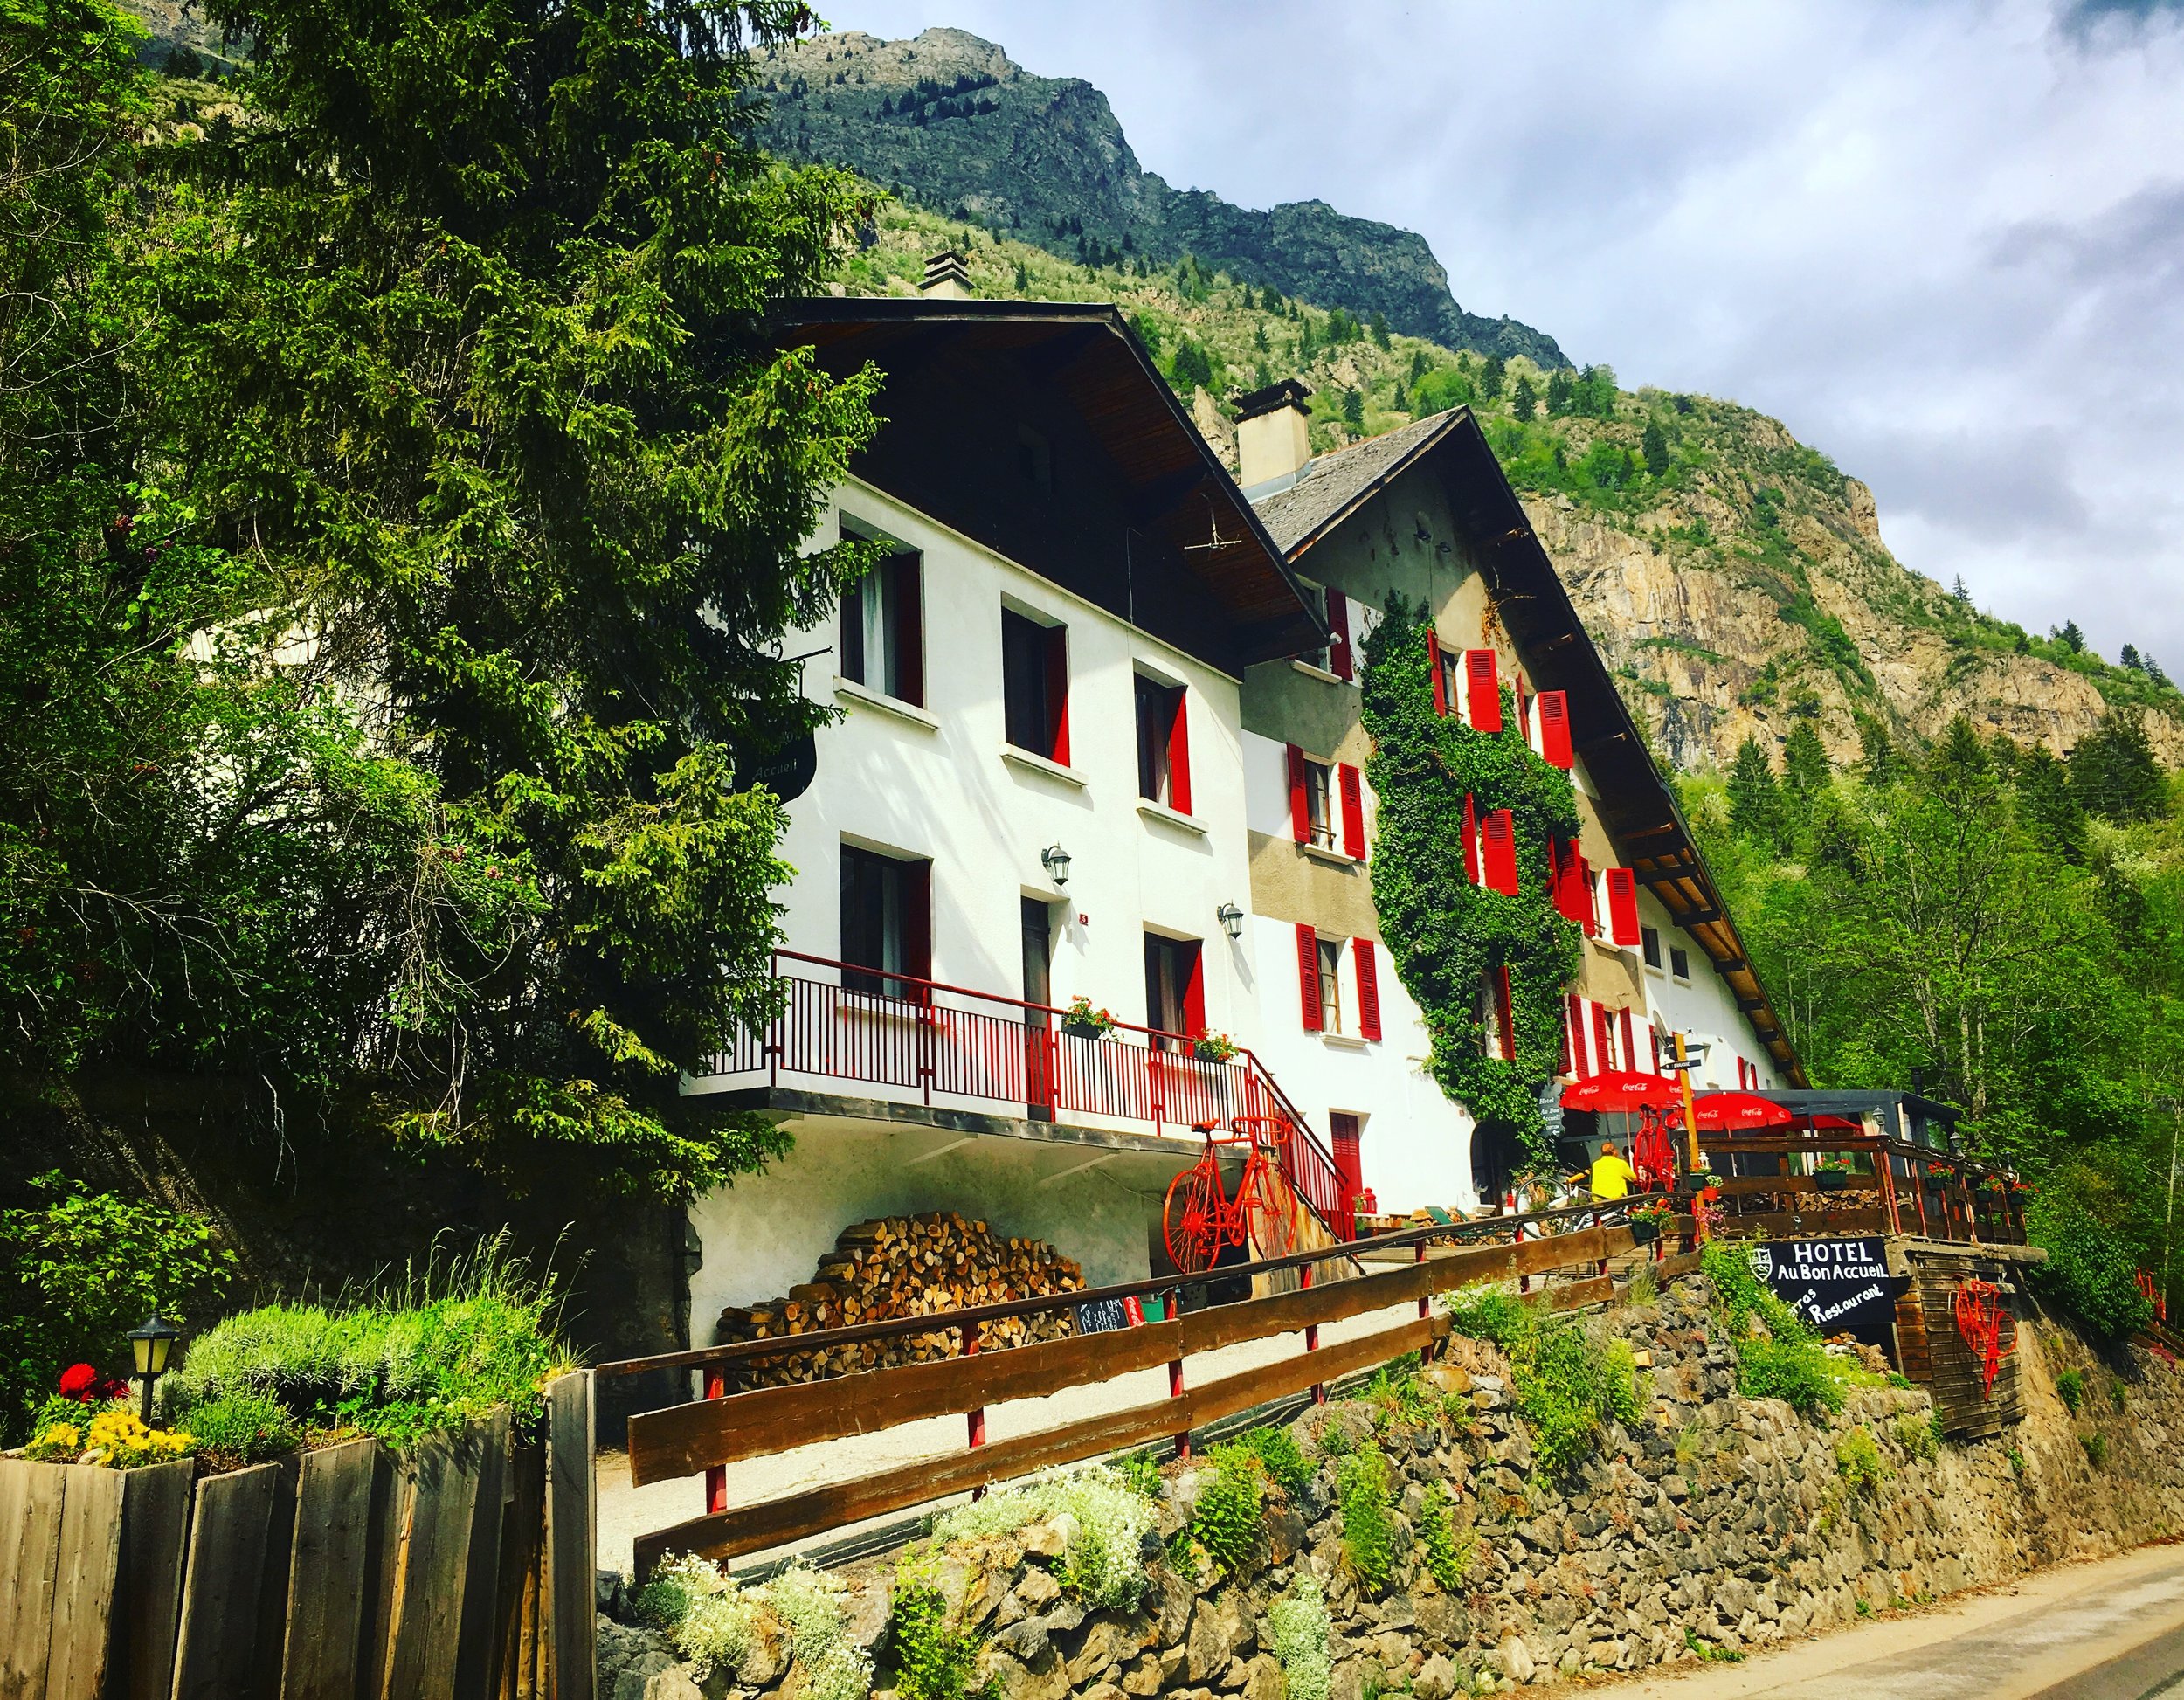  Hotel Au Bon Accueil   The hotel in the French Alps    CHECK OUR AVAILABILITY  